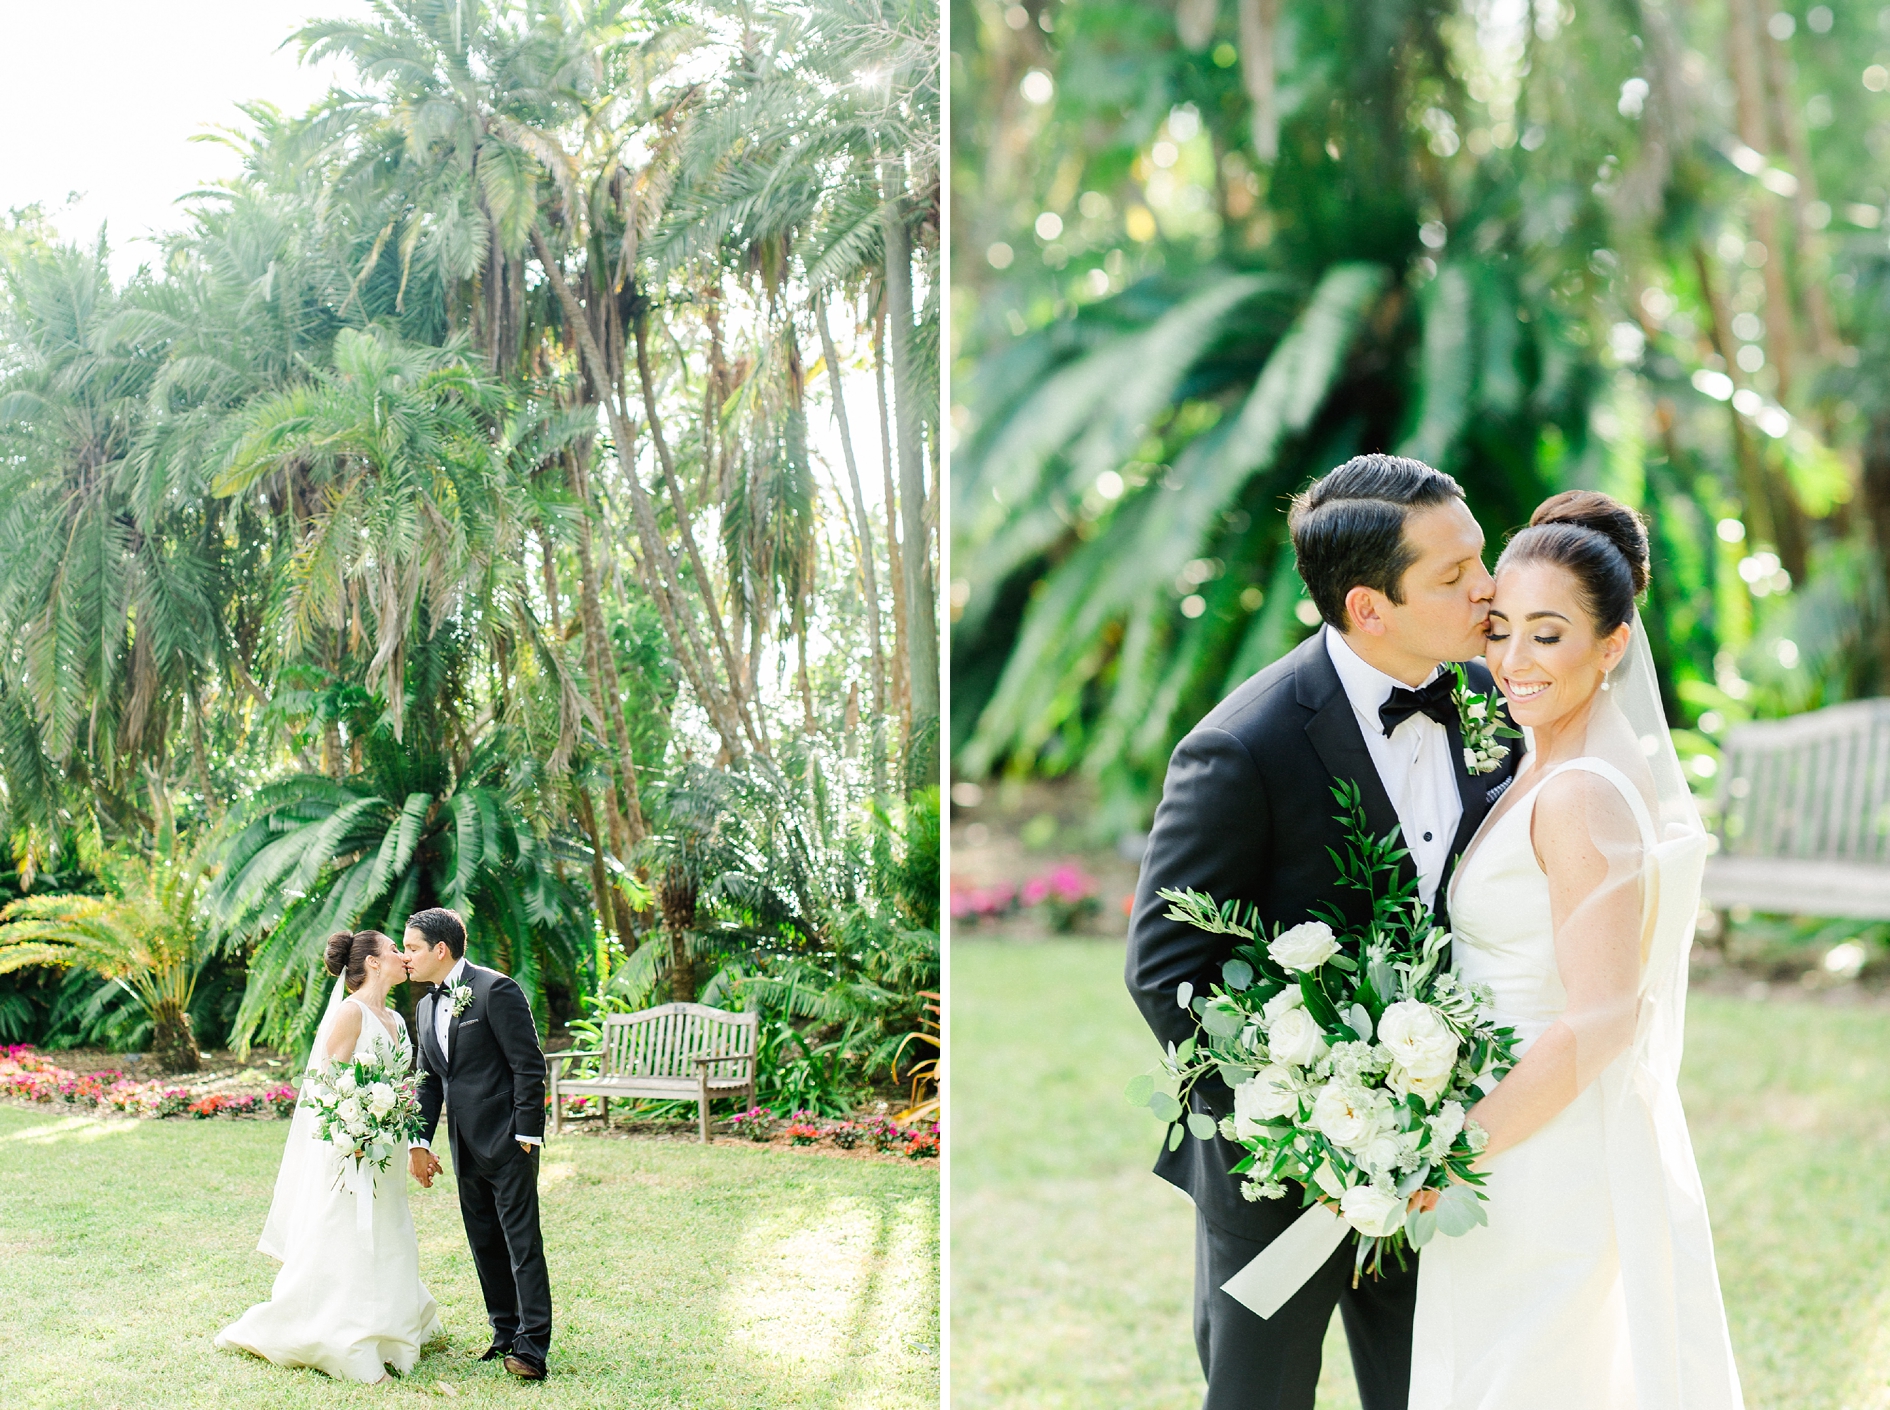 Marie Selby Botanical Gardens Wedding | © Ailyn La Torre Photography 2017